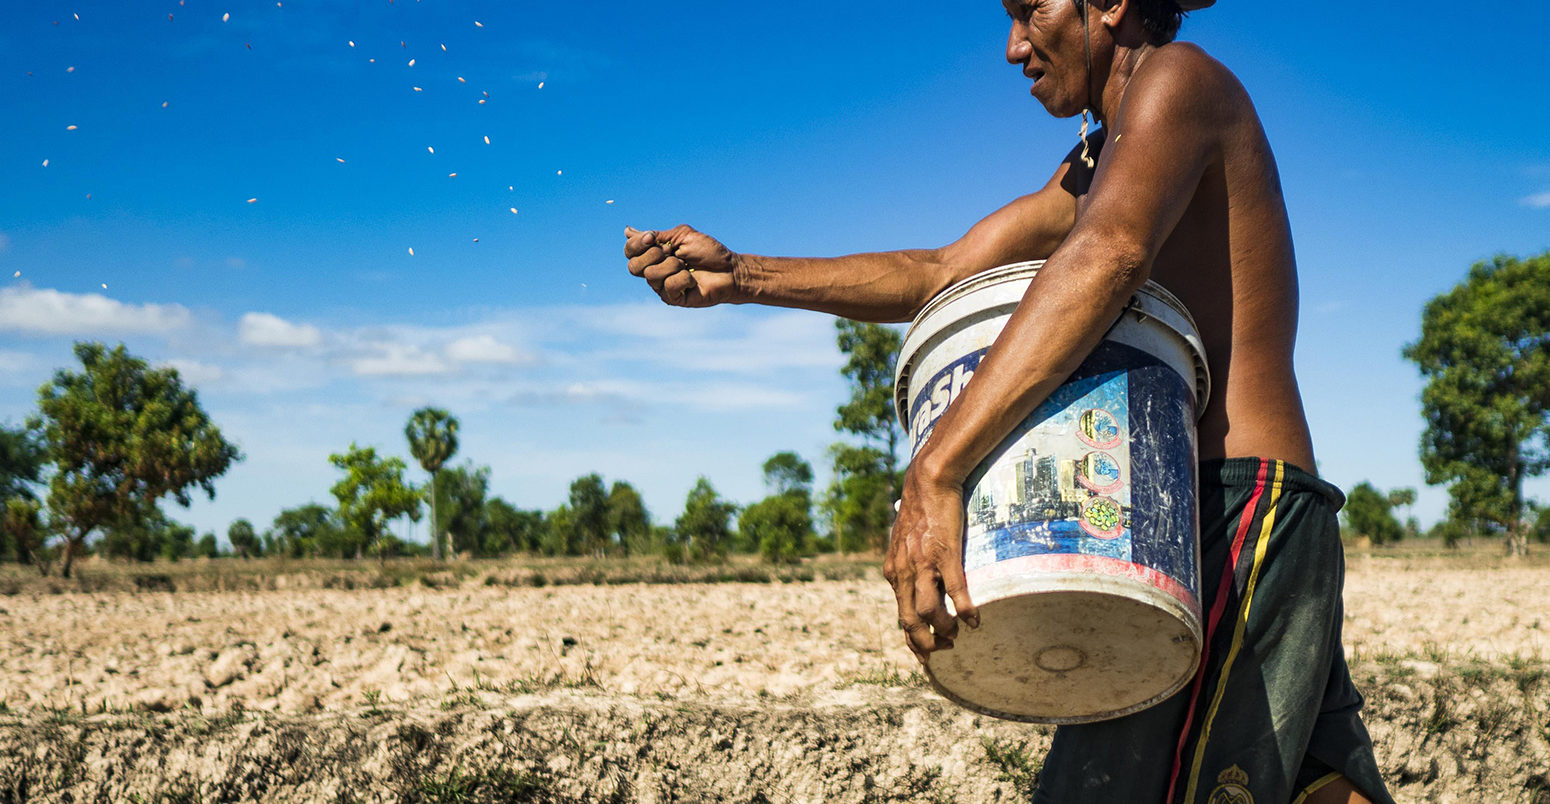 Prasat Bakong, Siem Reap, Cambodia. 2nd June, 2016. LERN, who has been farming all his life, plants rice in his fields near Seam Reap. Cambodia is in the second year of a record shattering drought, brought on by climate change and the El NiA±o weather pattern. Lern said this is driest he has ever seen his fields. He said he is planting because he has no choice but if they rainy season doesn't come, or if it's like last year's very short rainy season he will lose his crops.